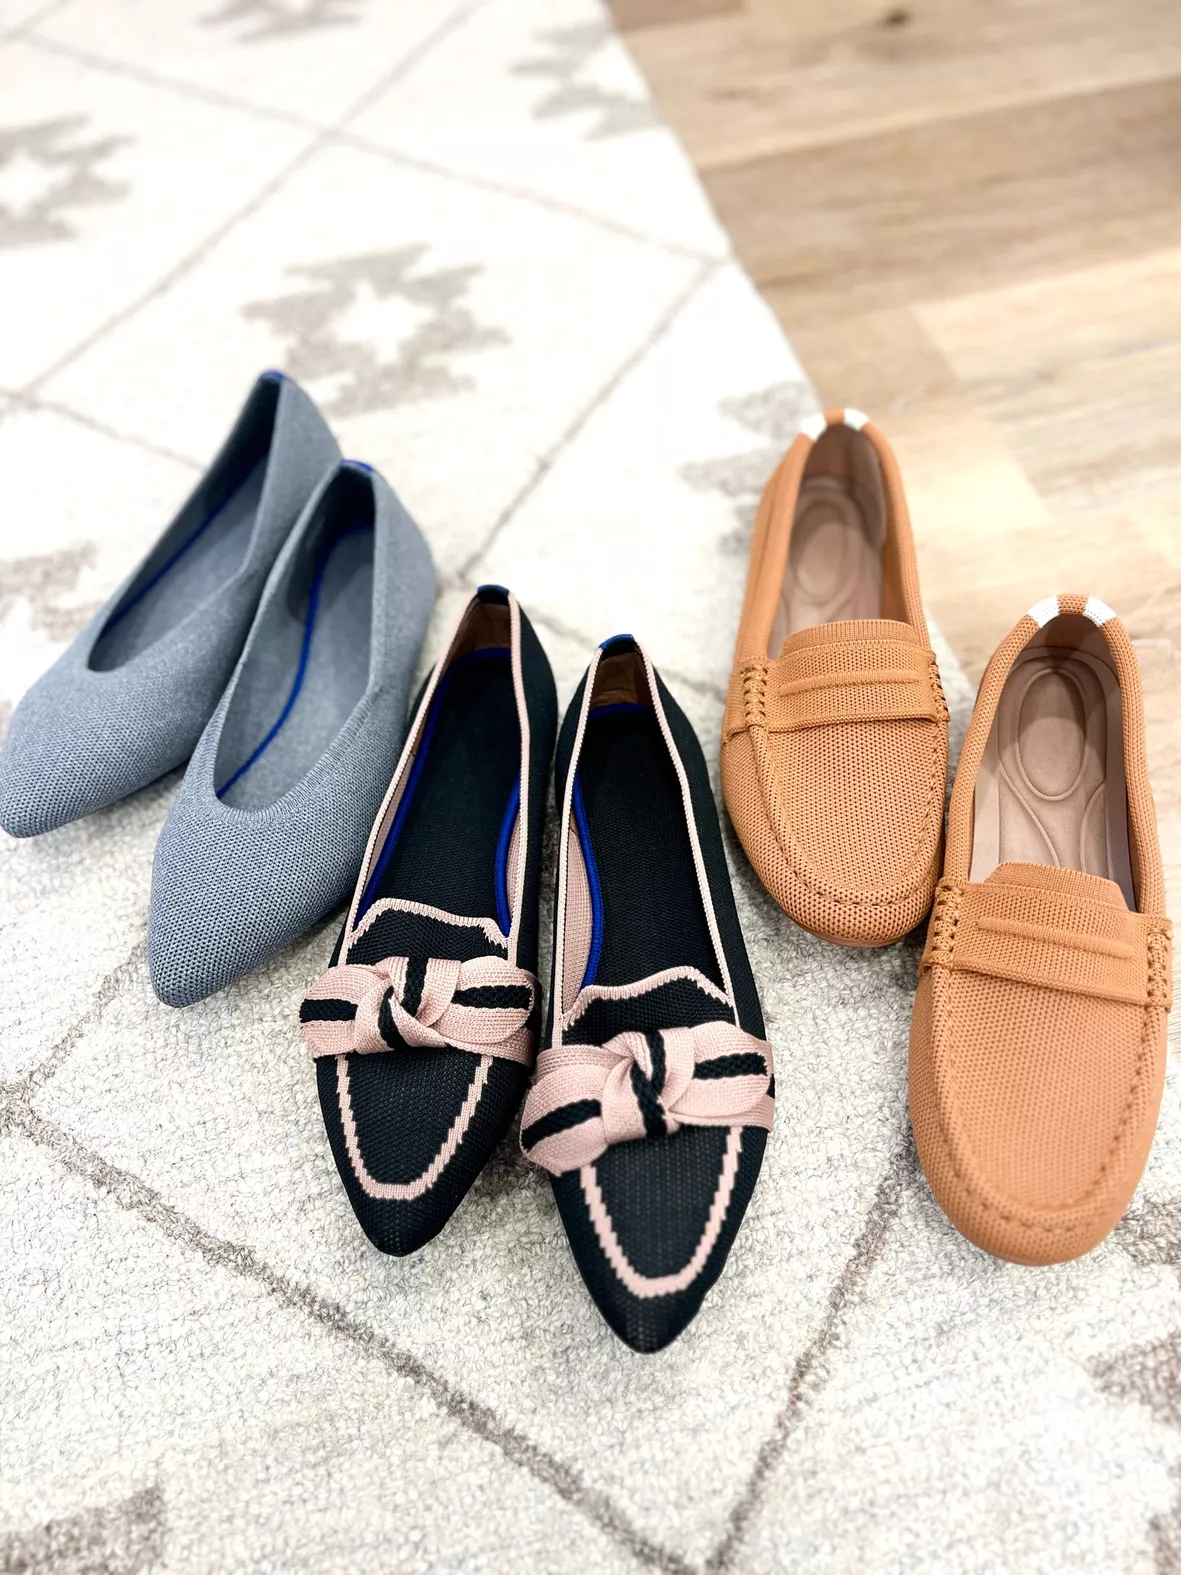 The Frank Mully Knit Flats Are a Travel Must-have